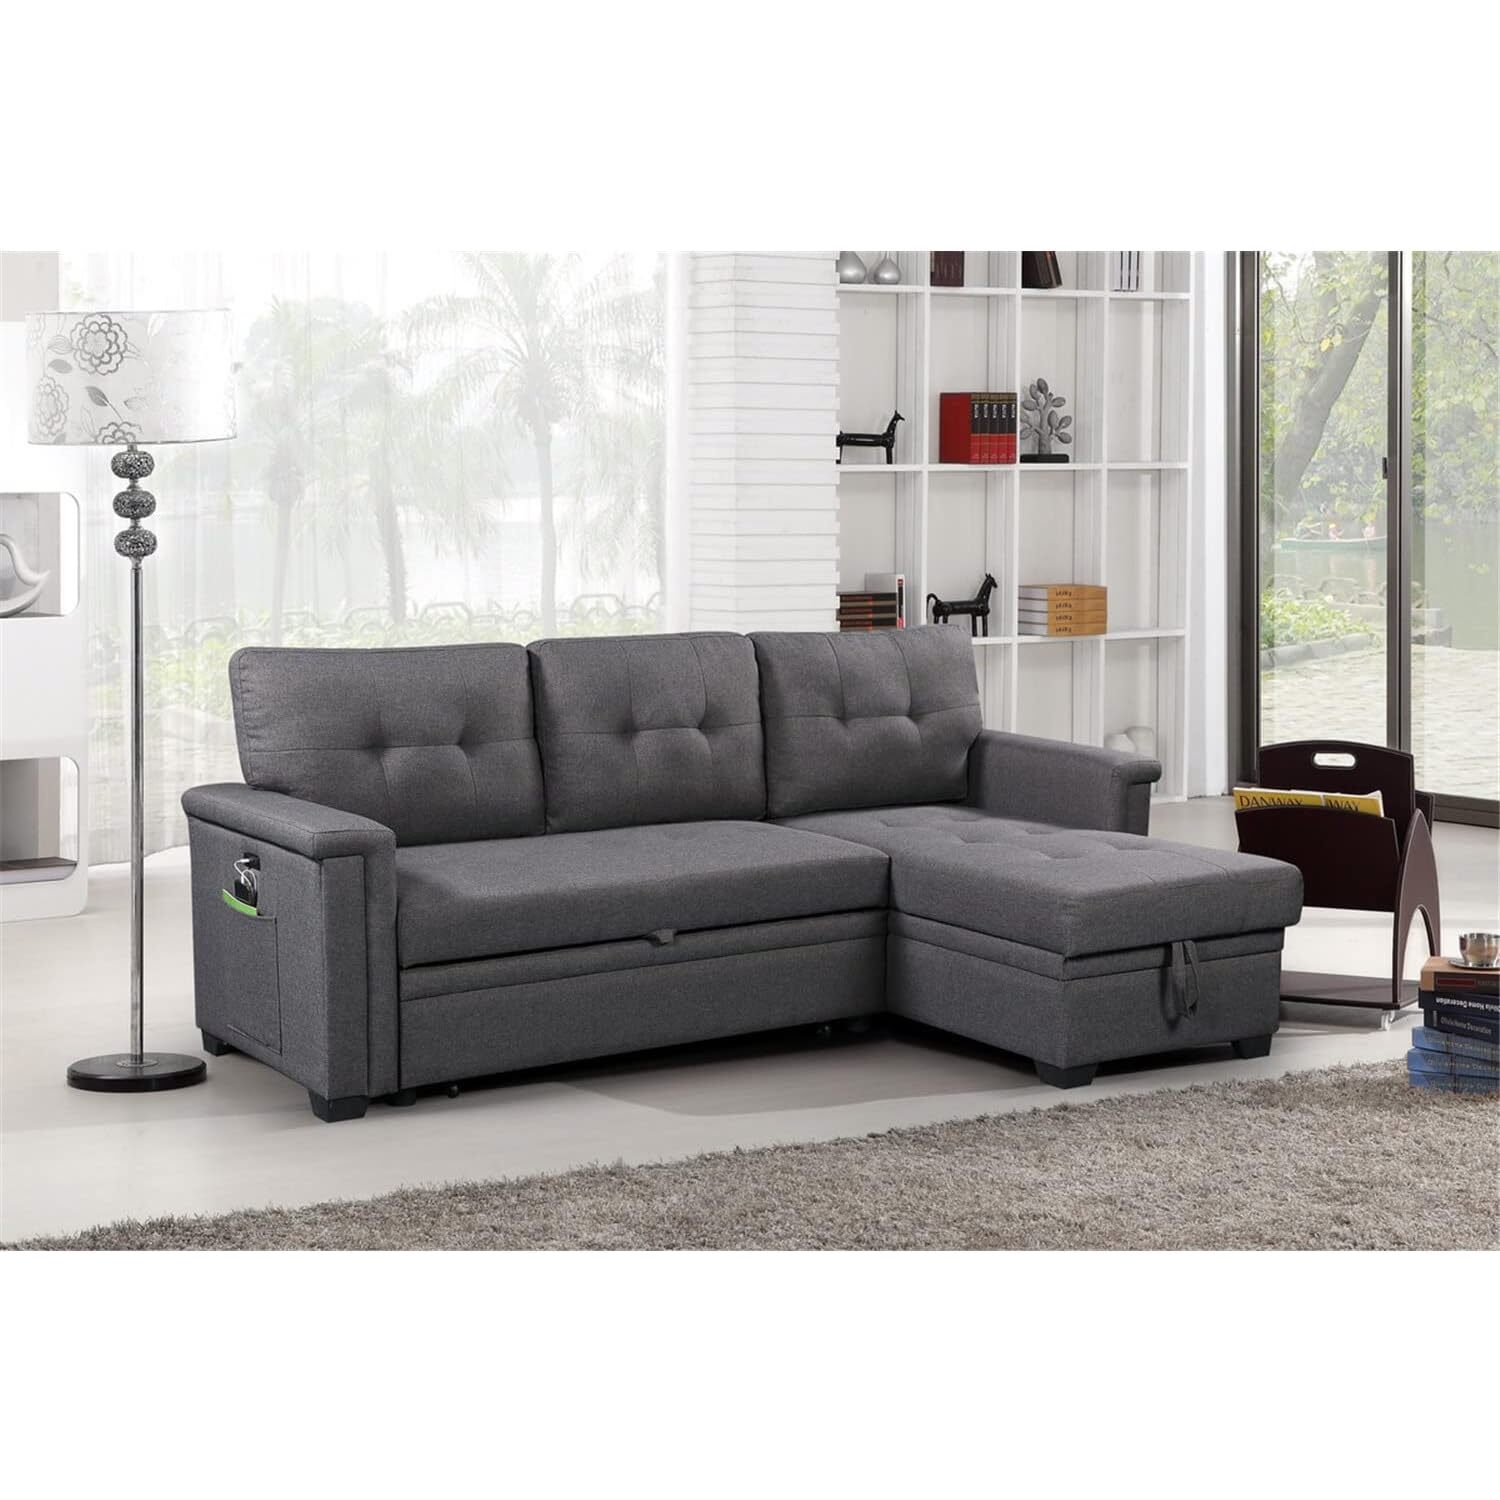 Lilola Home Sectional Sofa, Gray Cotton Blend - image 3 of 9